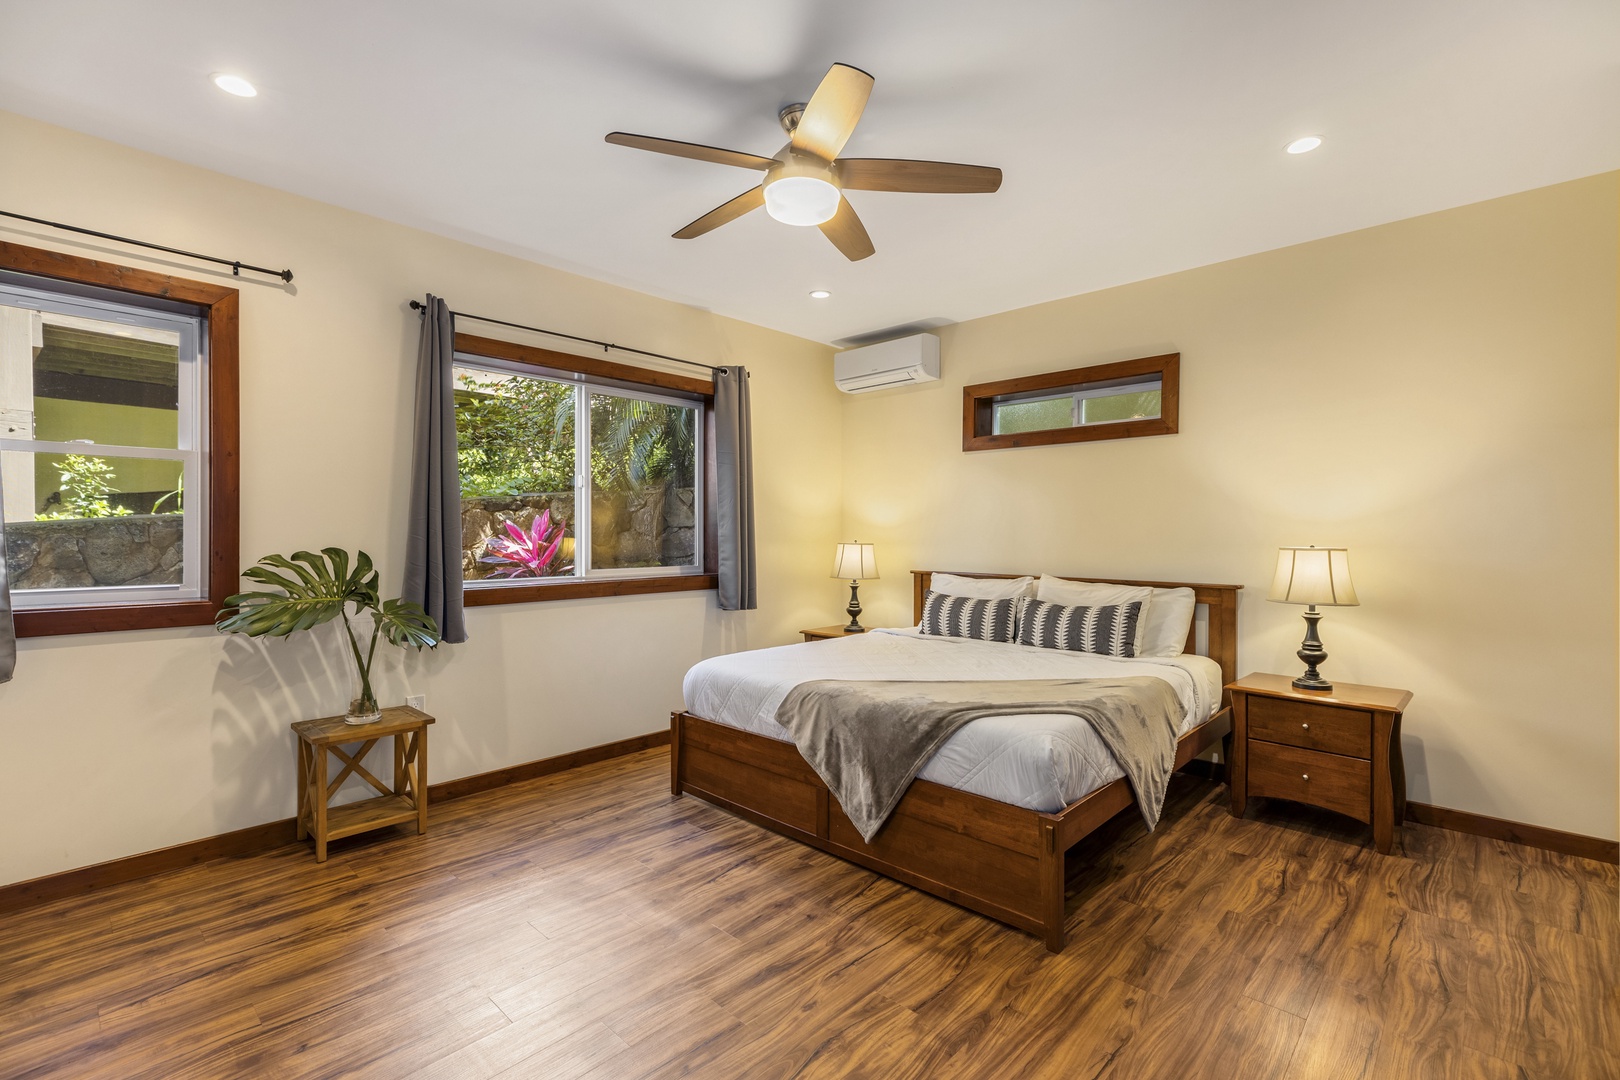 Haleiwa Vacation Rentals, Waimea Dream - A fourth bedroom downstairs comes appointed with a king-size bed and split air conditioning.